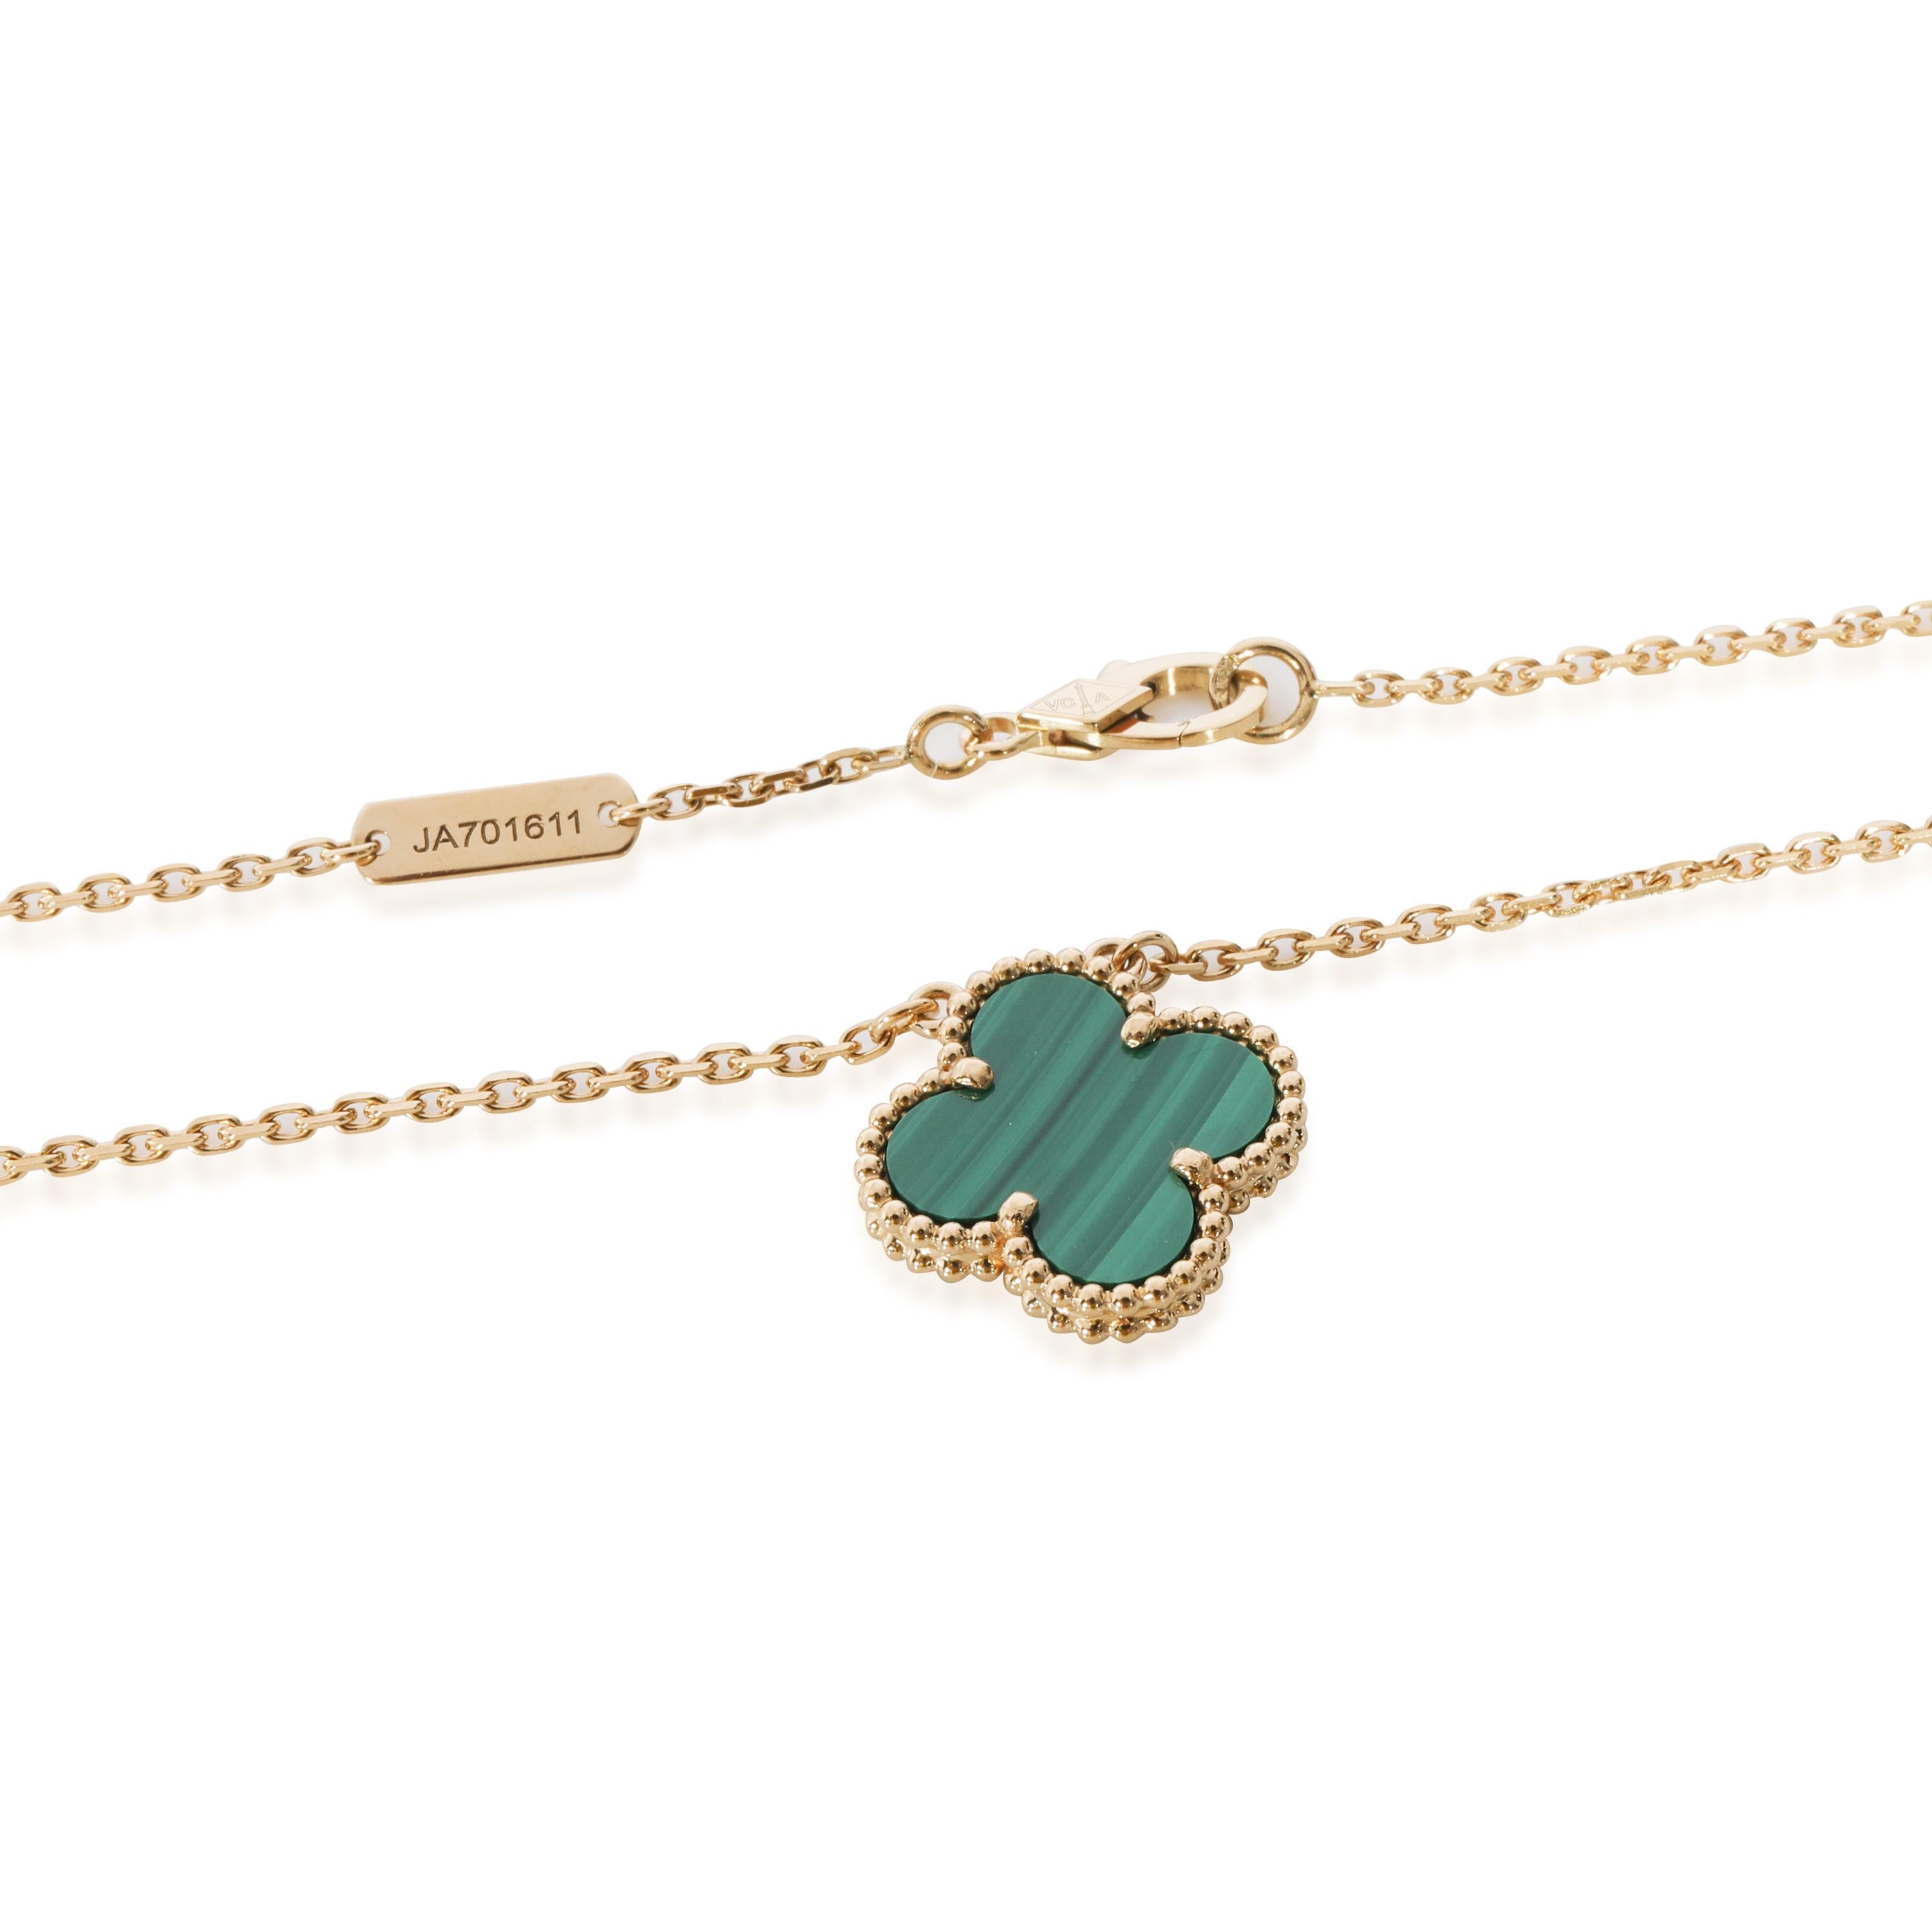 Van Cleef & Arpels Vintage Alhambra Pendant With Malachite in 18k Yellow Gold
 
 PRIMARY DETAILS
 SKU: 127700
 Listing Title: Van Cleef & Arpels Vintage Alhambra Pendant With Malachite in 18k Yellow Gold
 Condition Description: Launched in 1968, the